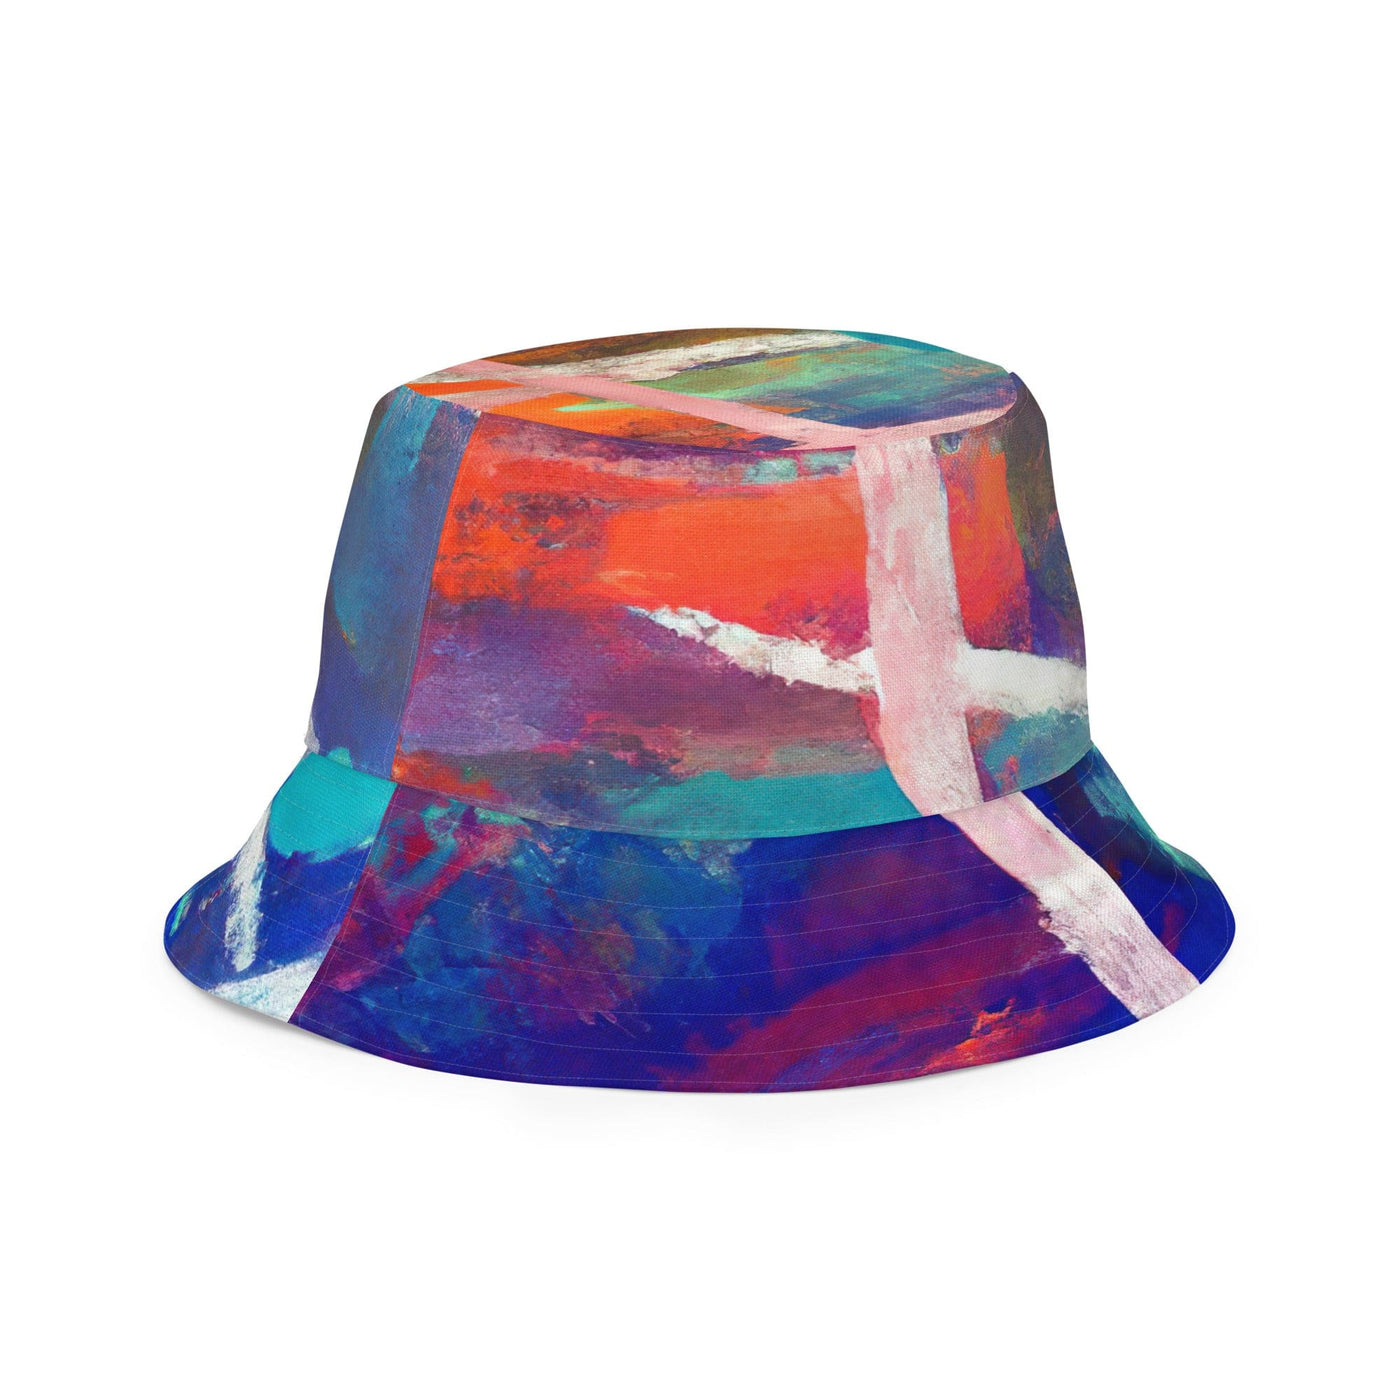 Reversible Bucket Hat Red Blue Abstract Pattern - Unisex / Bucket Hats